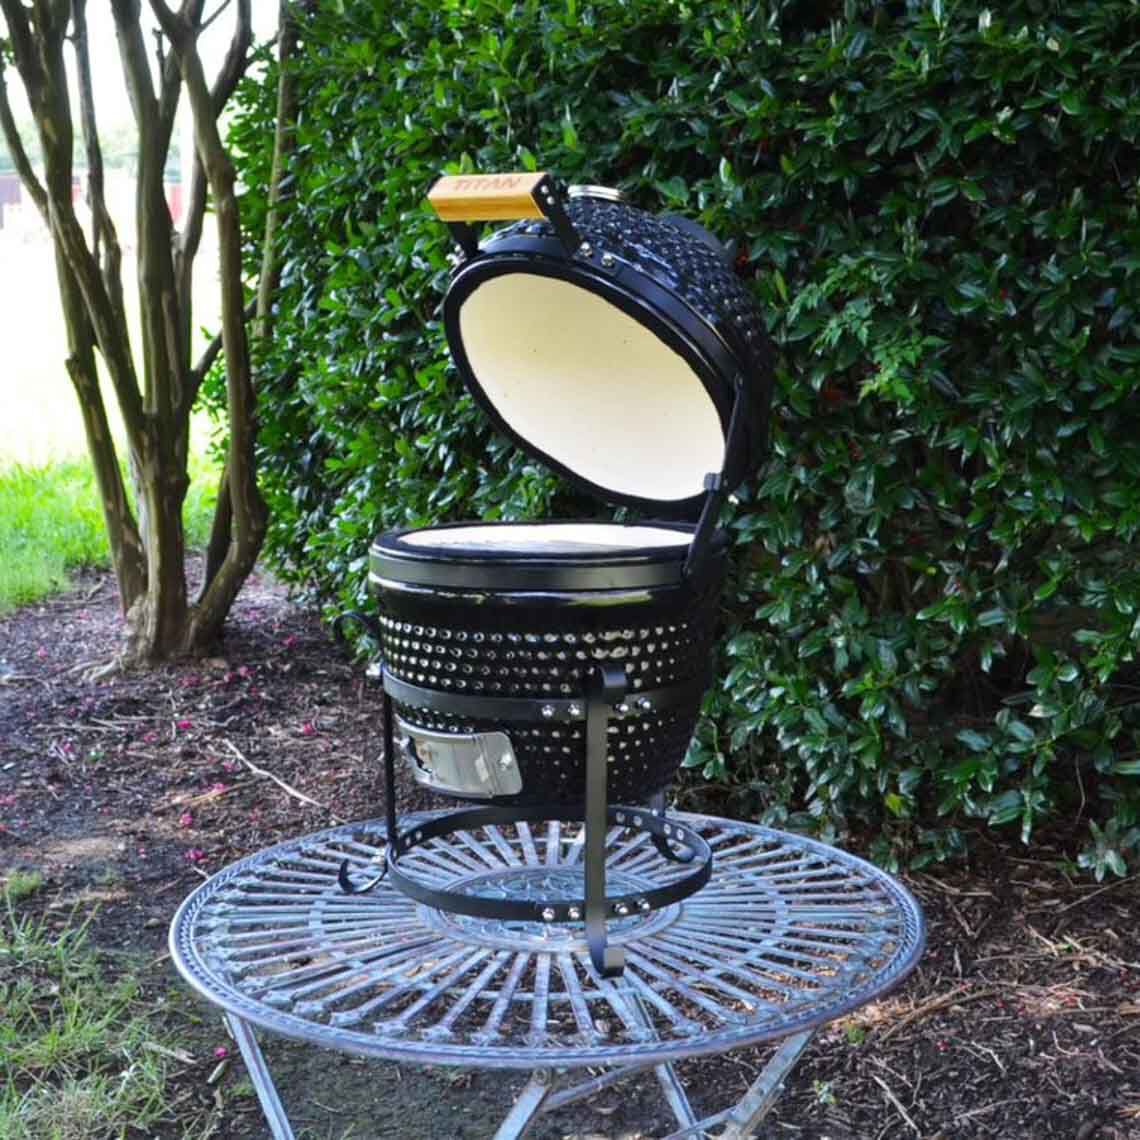 Scratch and Dent - 10” Kamado Ceramic Charcoal Grill - FINAL SALE